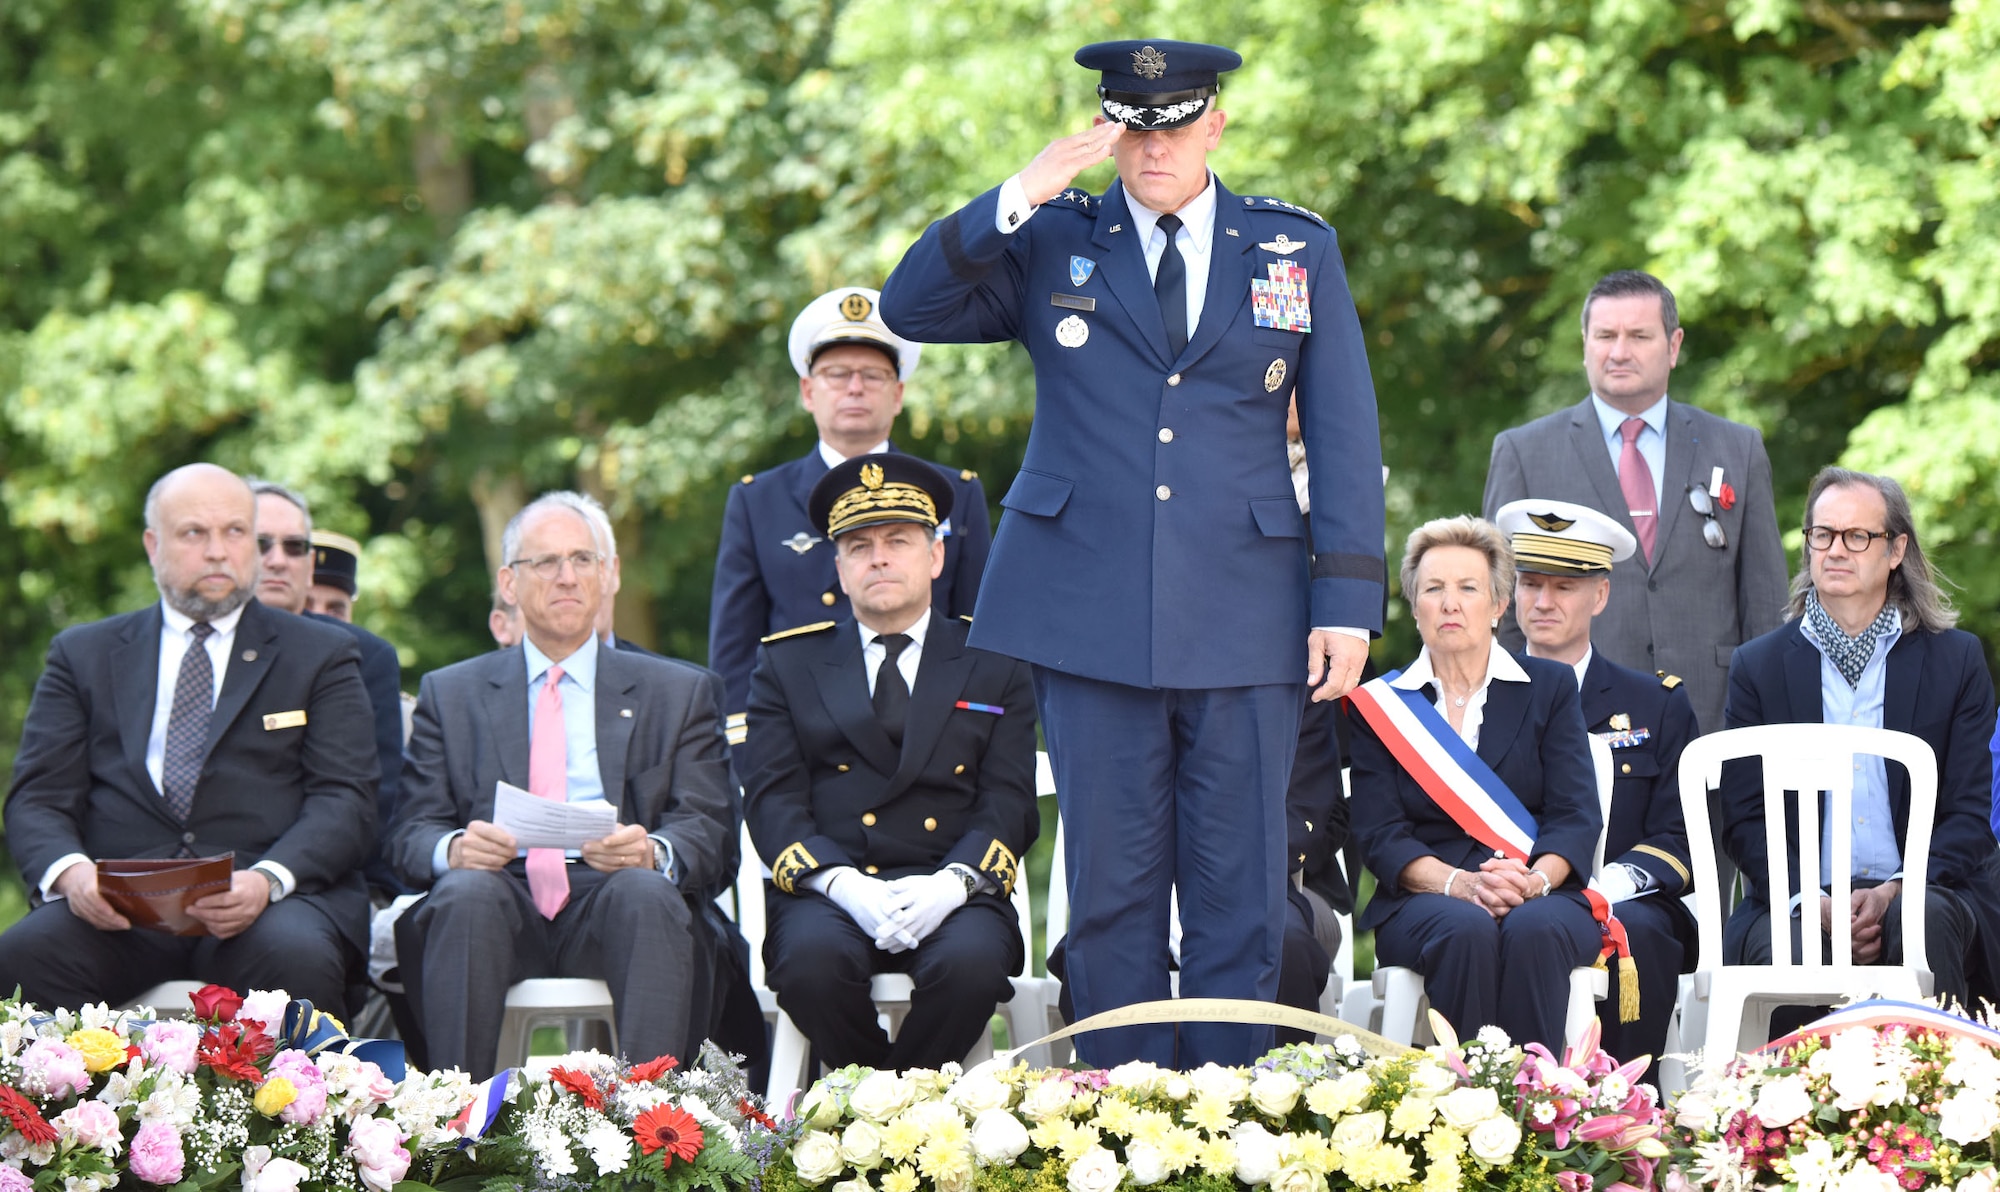 PARIS – U.S. Air Force Gen. Frank Gorenc, U.S. Air Forces in Europe-Air Forces Africa commander, salutes after laying a wreath during a Memorial Day ceremony at the Lafayette Escadrille Memorial, in Marnes-la-Coquette, France, May 28, 2016. During the ceremony, French and American speakers honored the shared sacrifices of U.S. and French service members fighting for each other’s freedom and security in a relationship that began more than 240 years ago during the American Revolutionary War. (U.S. Air Force photo by Senior Master Sgt. Brian Bahret/Released) 